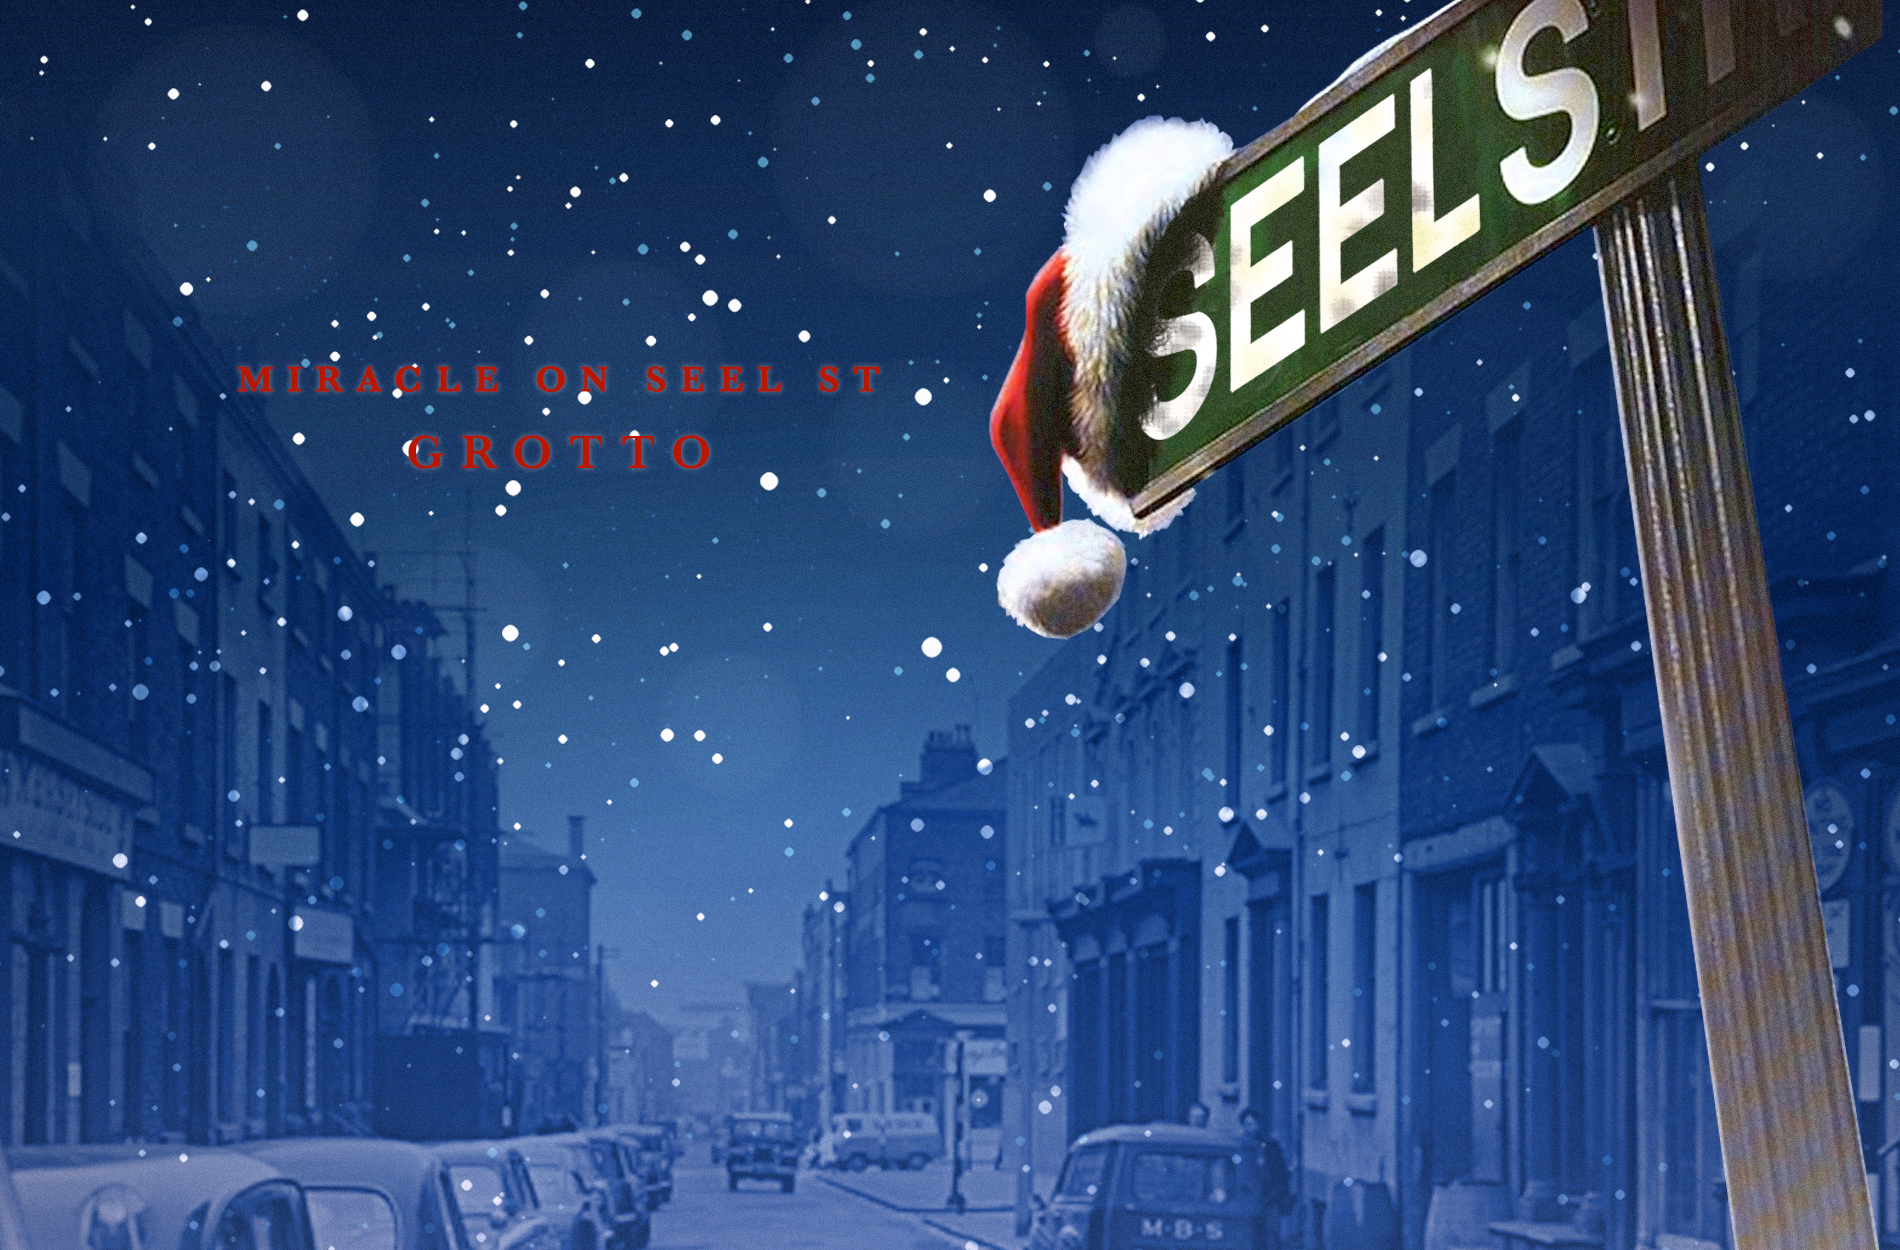 Miracle on Seel Street offers Christmas parties in secret bar